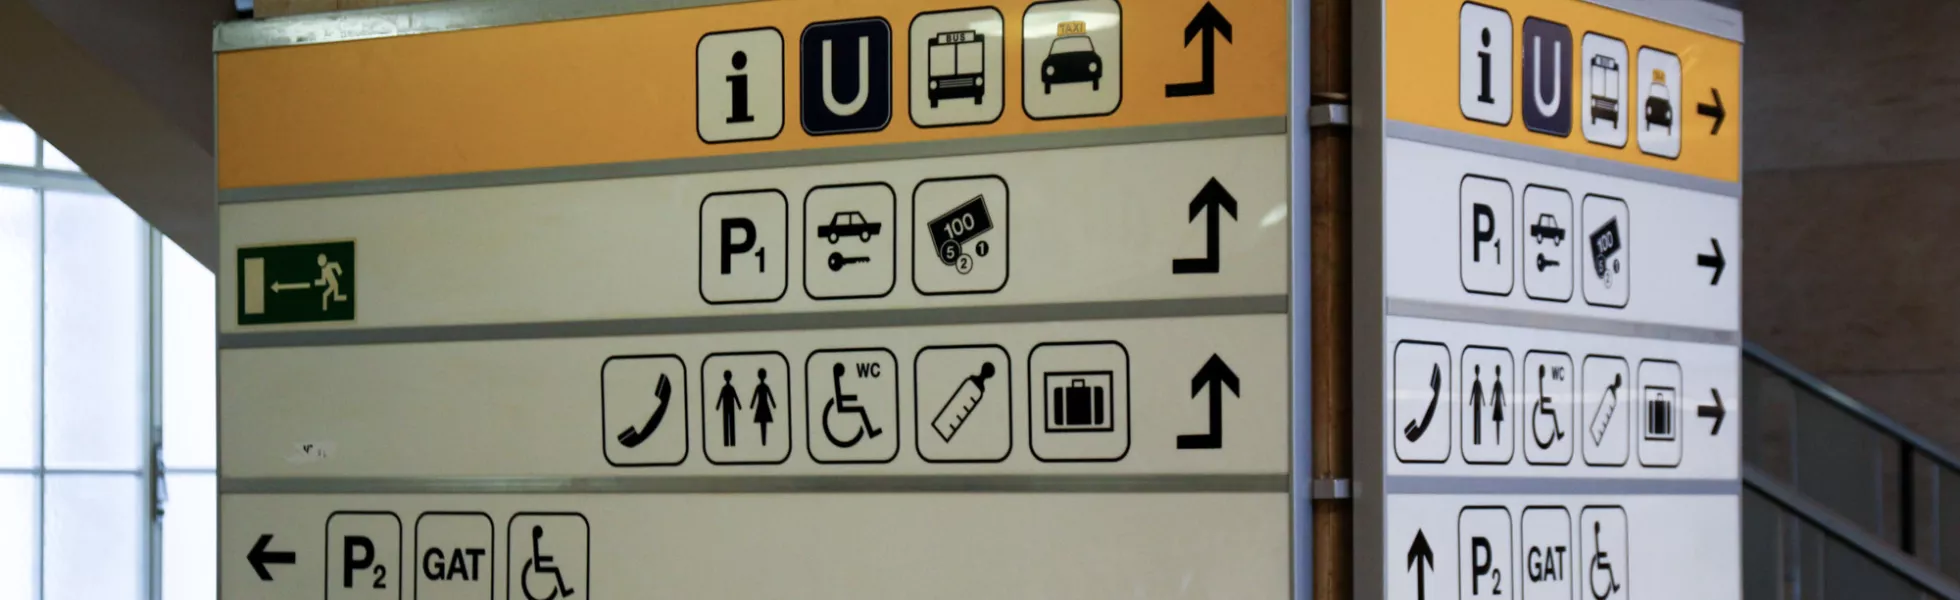 Multiple symbols on a sign on a pillar in a German airport.